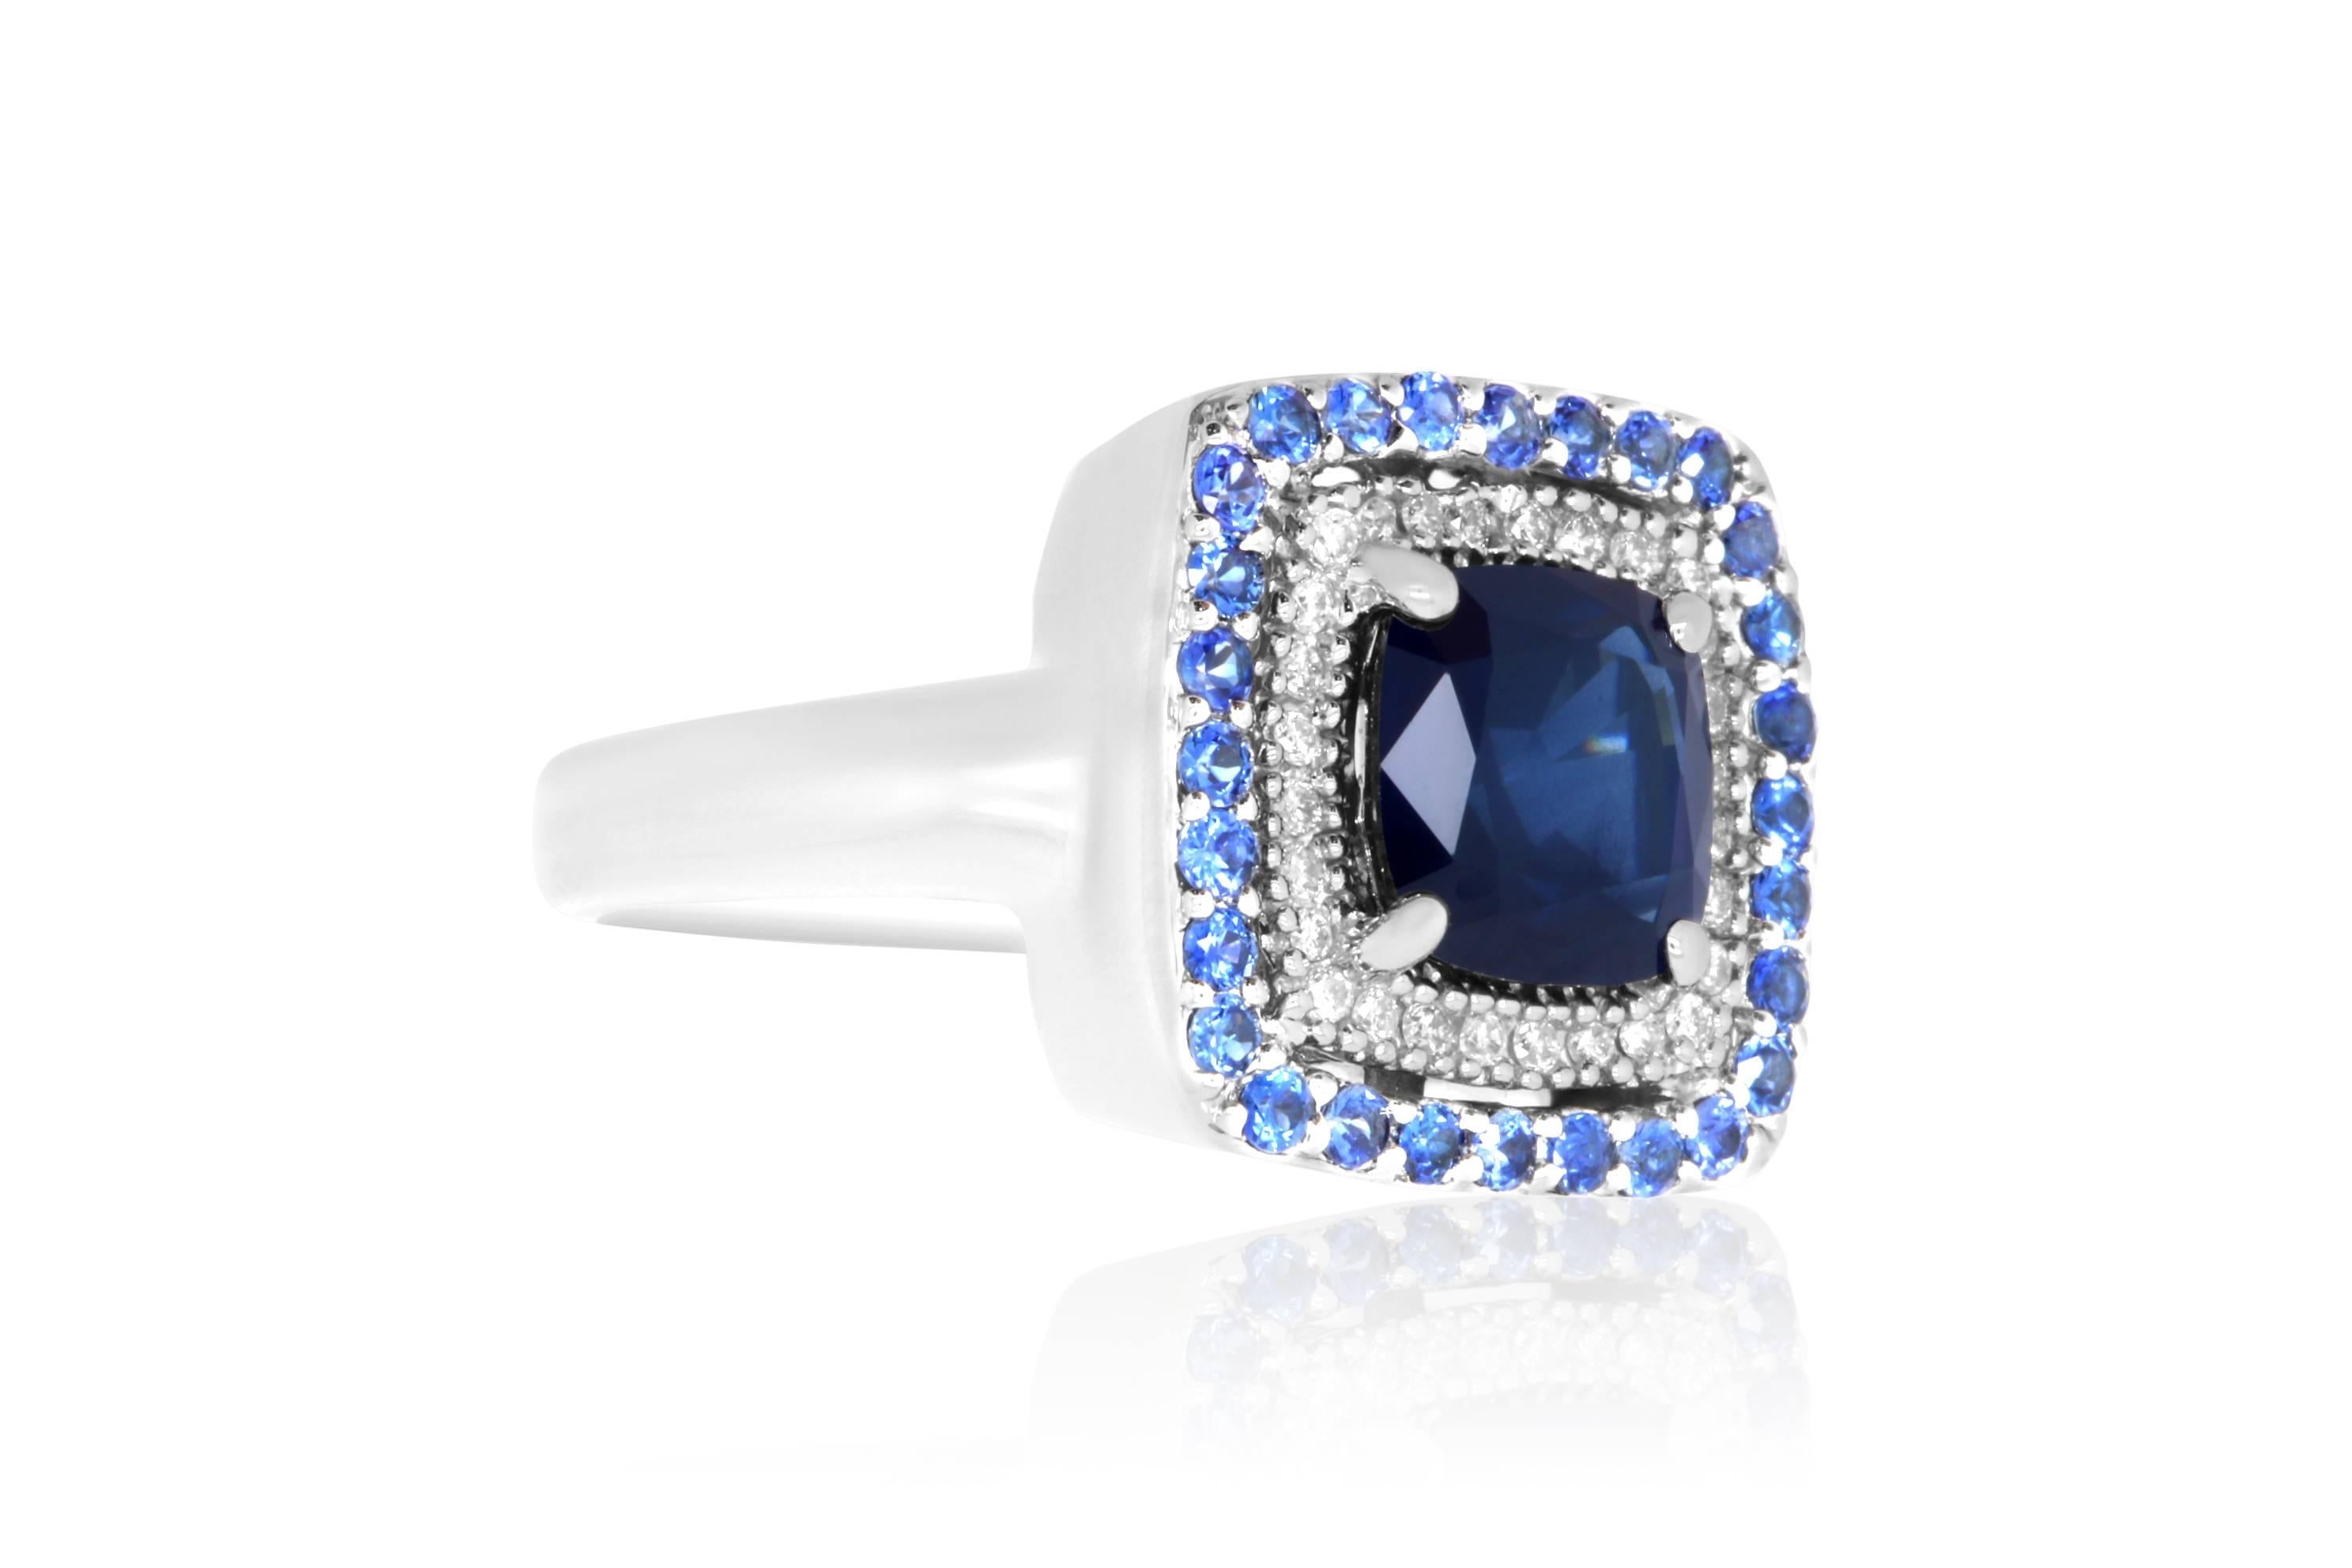 Material: 14k White Gold 
Center Stone Details: 1 Cushion Cut Blue Sapphire at 2.25 Carats - 7mm
Mounting Details: Brilliant Round White Diamonds at 0.10 Carats. Clarity: SI / Color: H-I. 
28 Round Blue Sapphires at 1.20 Carats.
Ring Size: Size 5.25